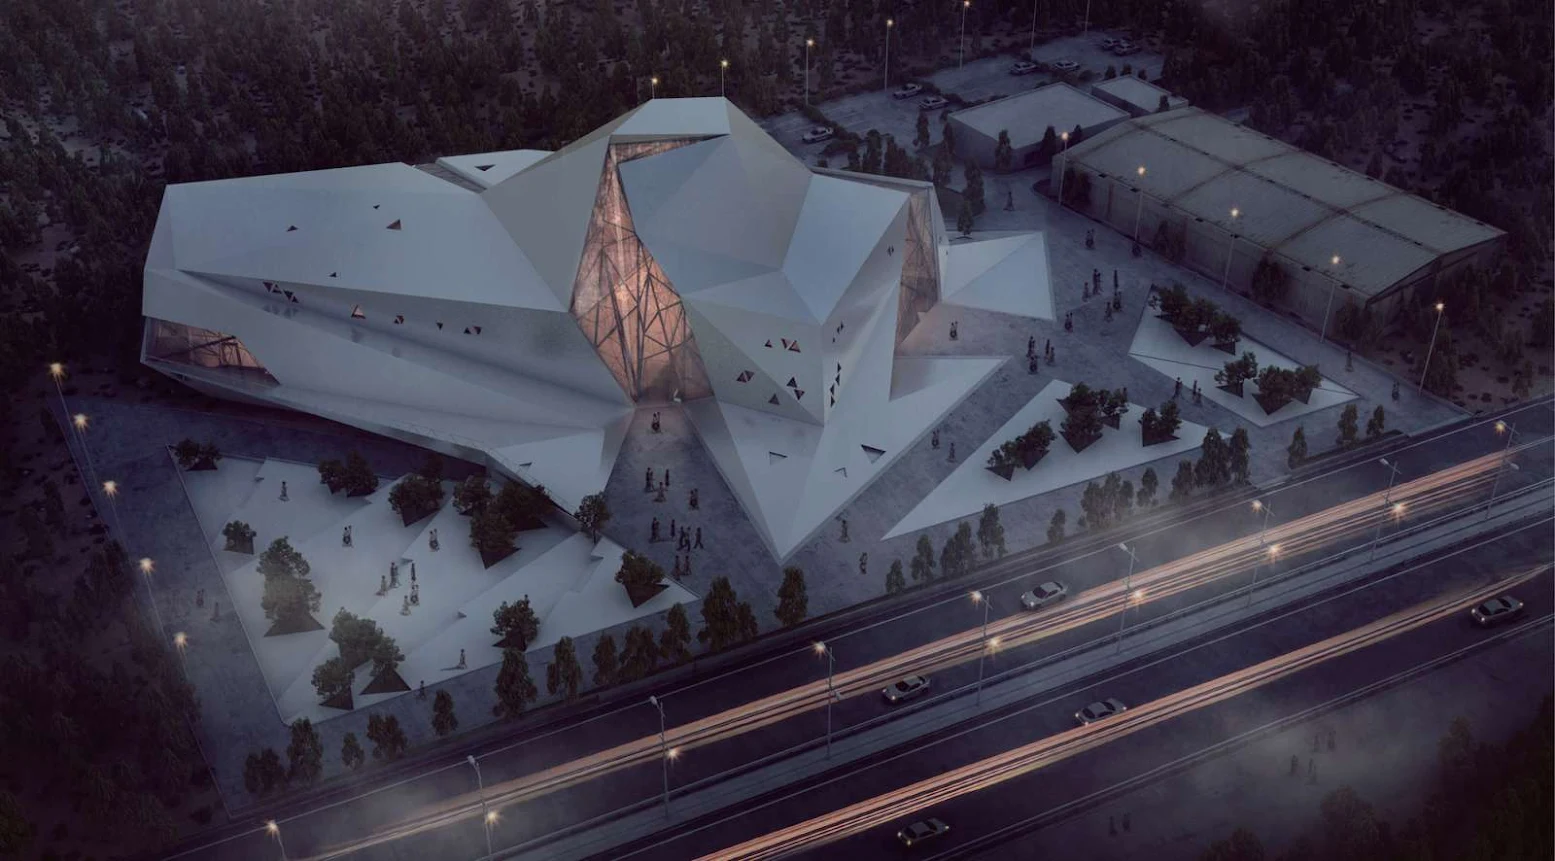 Polour Rock Climbing Hall by New Wave Architecture